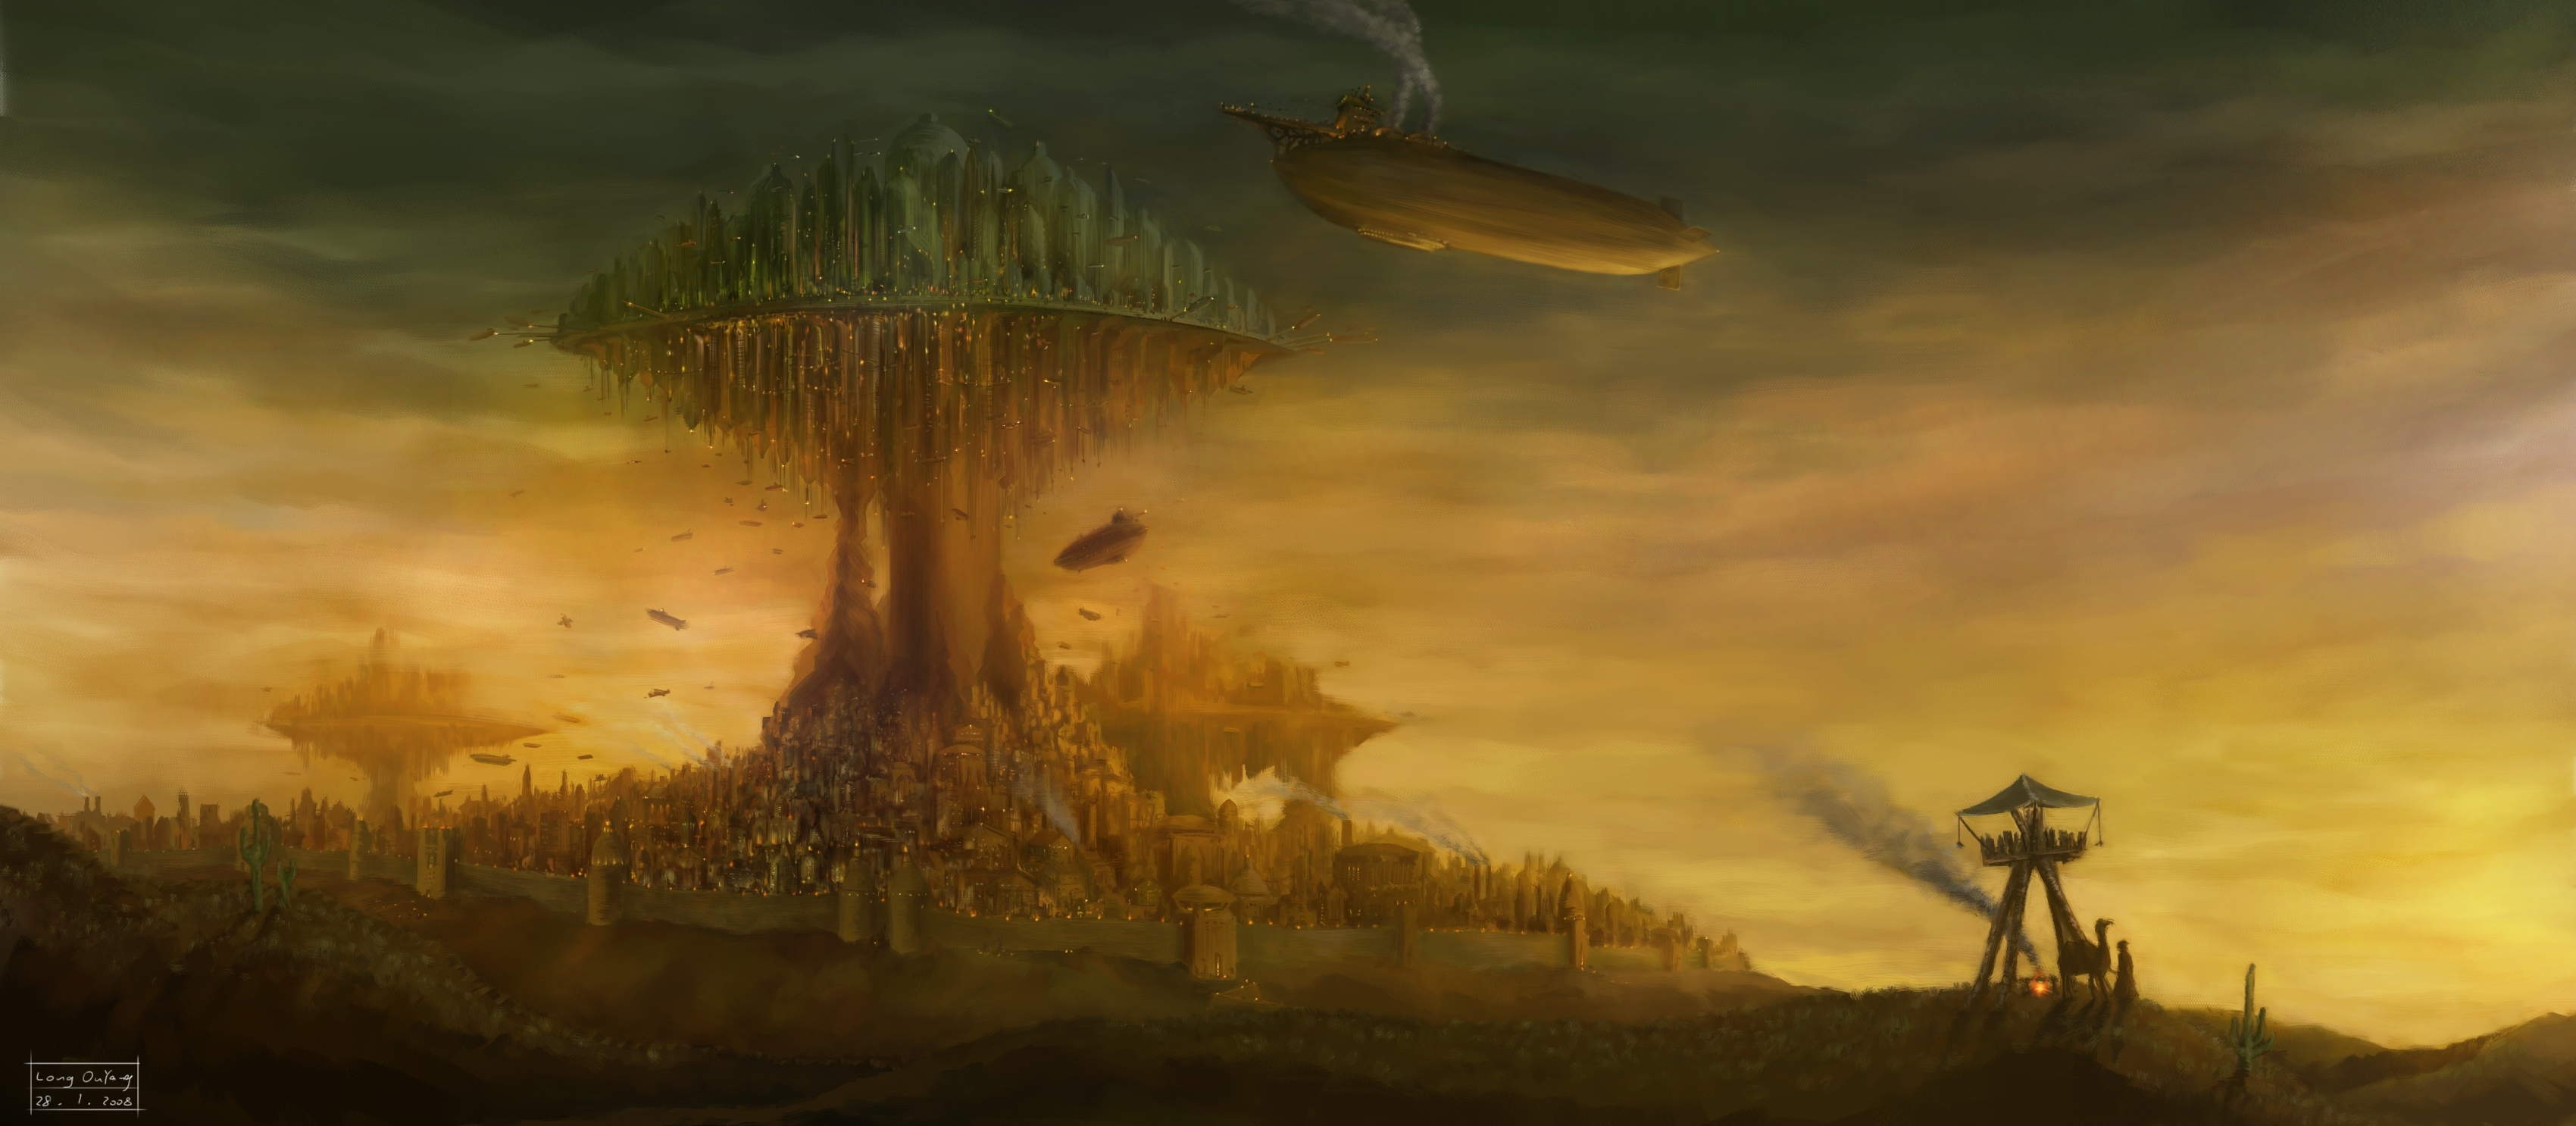 blimps, Aircrafts, Airplanes, Fantasy, Cities, Steampunk Wallpaper